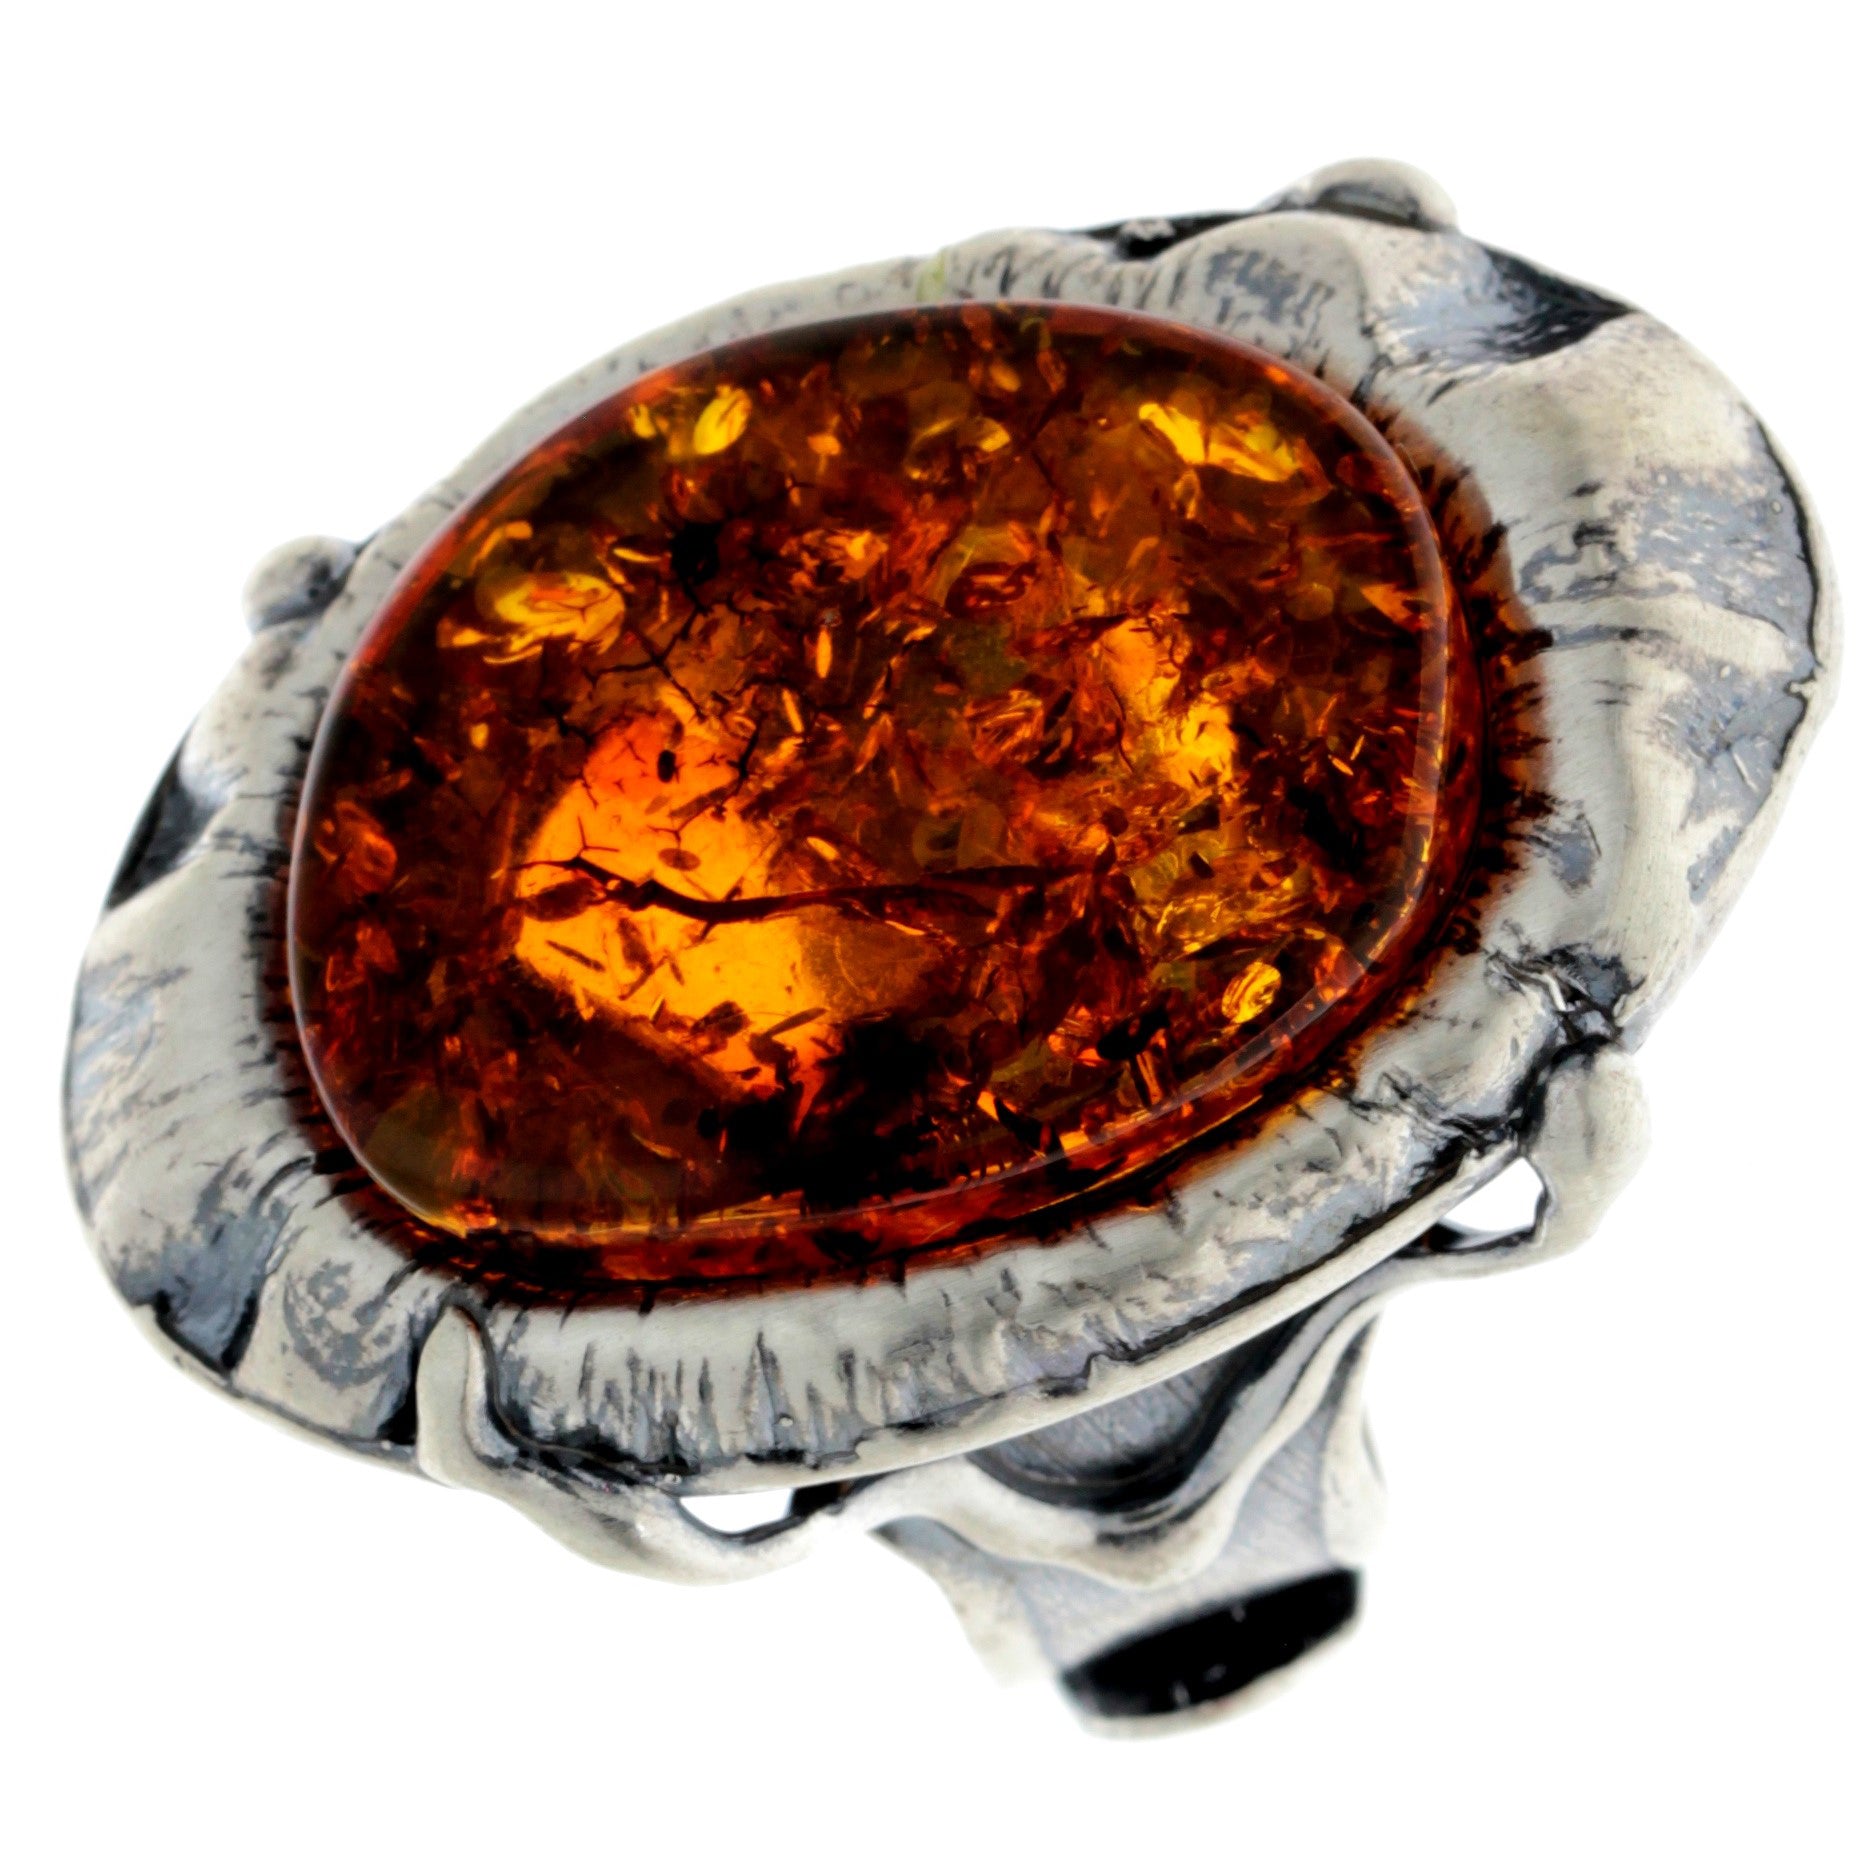 925 Sterling Silver & Genuine Cognac Baltic Amber Unique Ring - RG0721